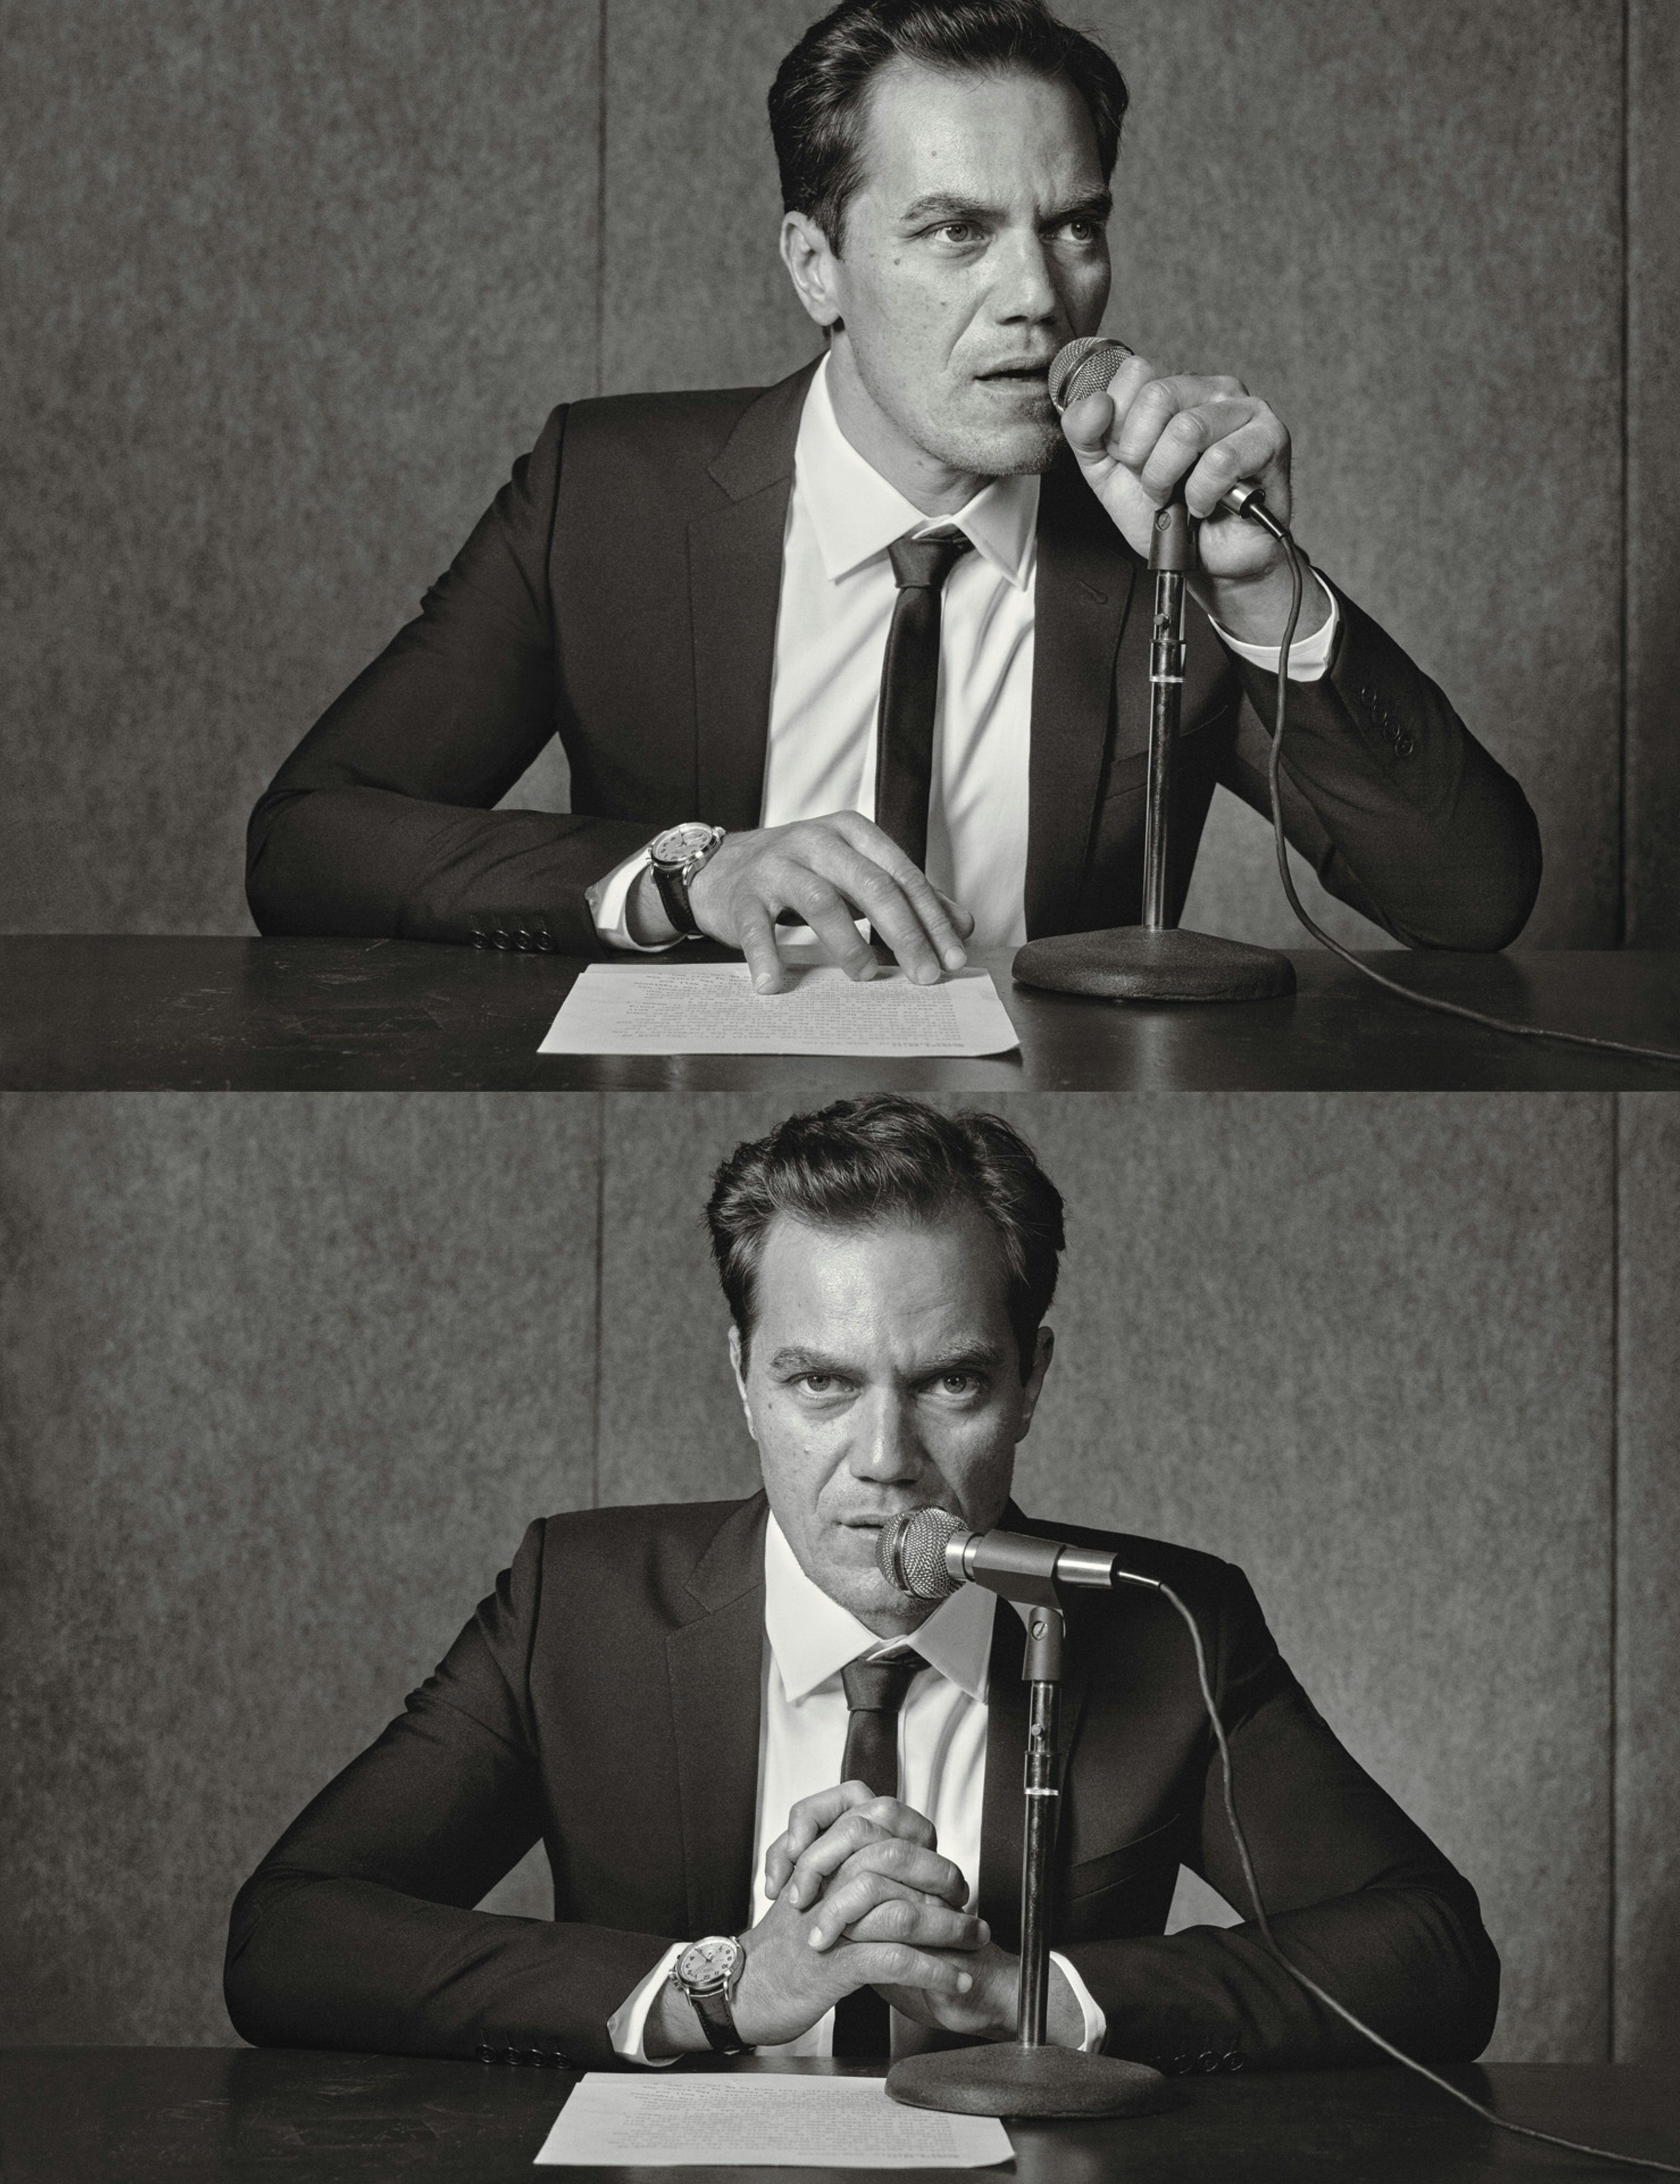 Michael Shannon: Movie Love Scenes Are Like Real Sex, Only Without the  Pleasure